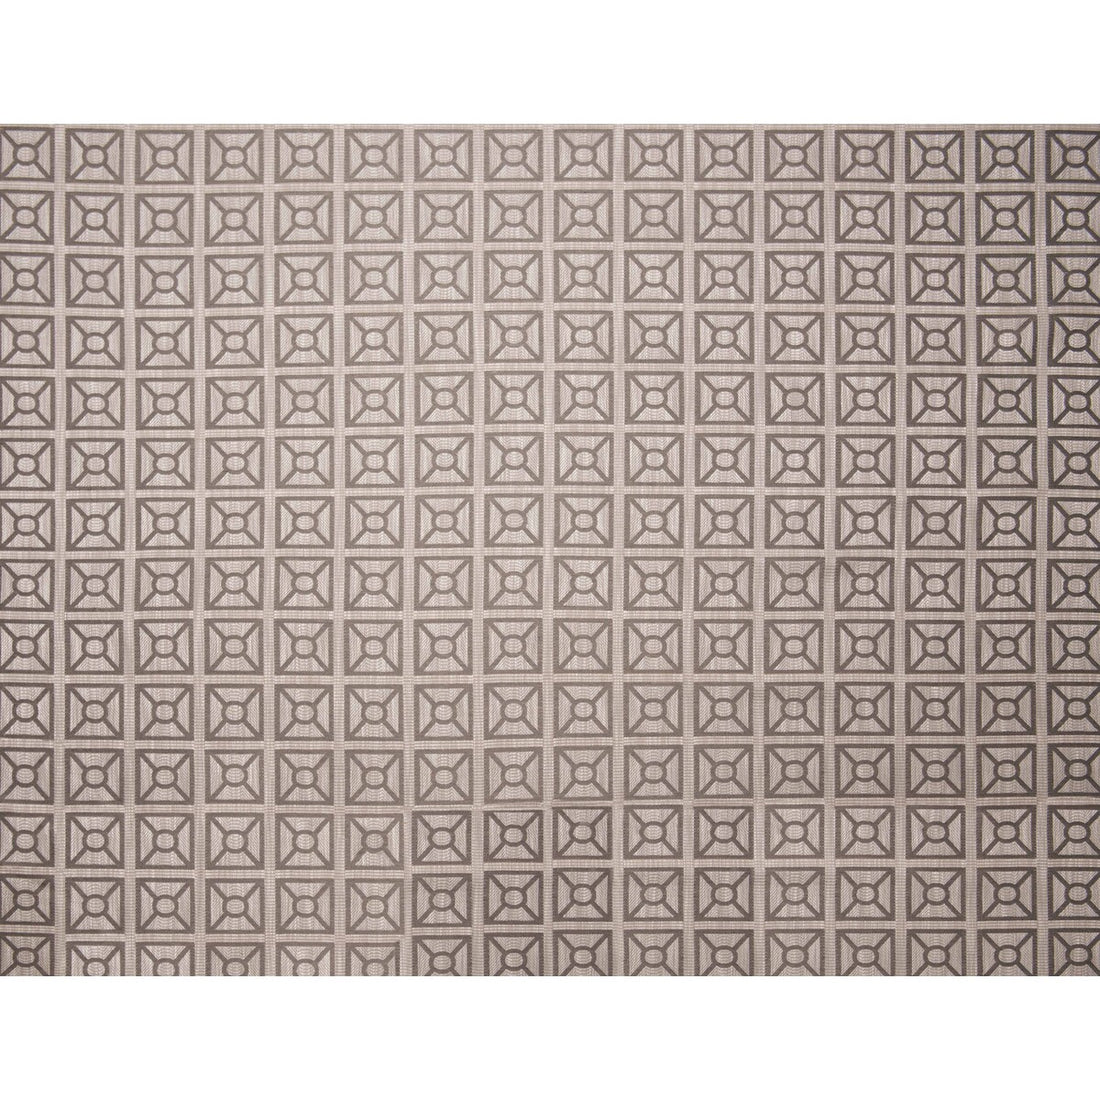 Arabica fabric in gris color - pattern GDT5390.4.0 - by Gaston y Daniela in the Gaston Africalia collection